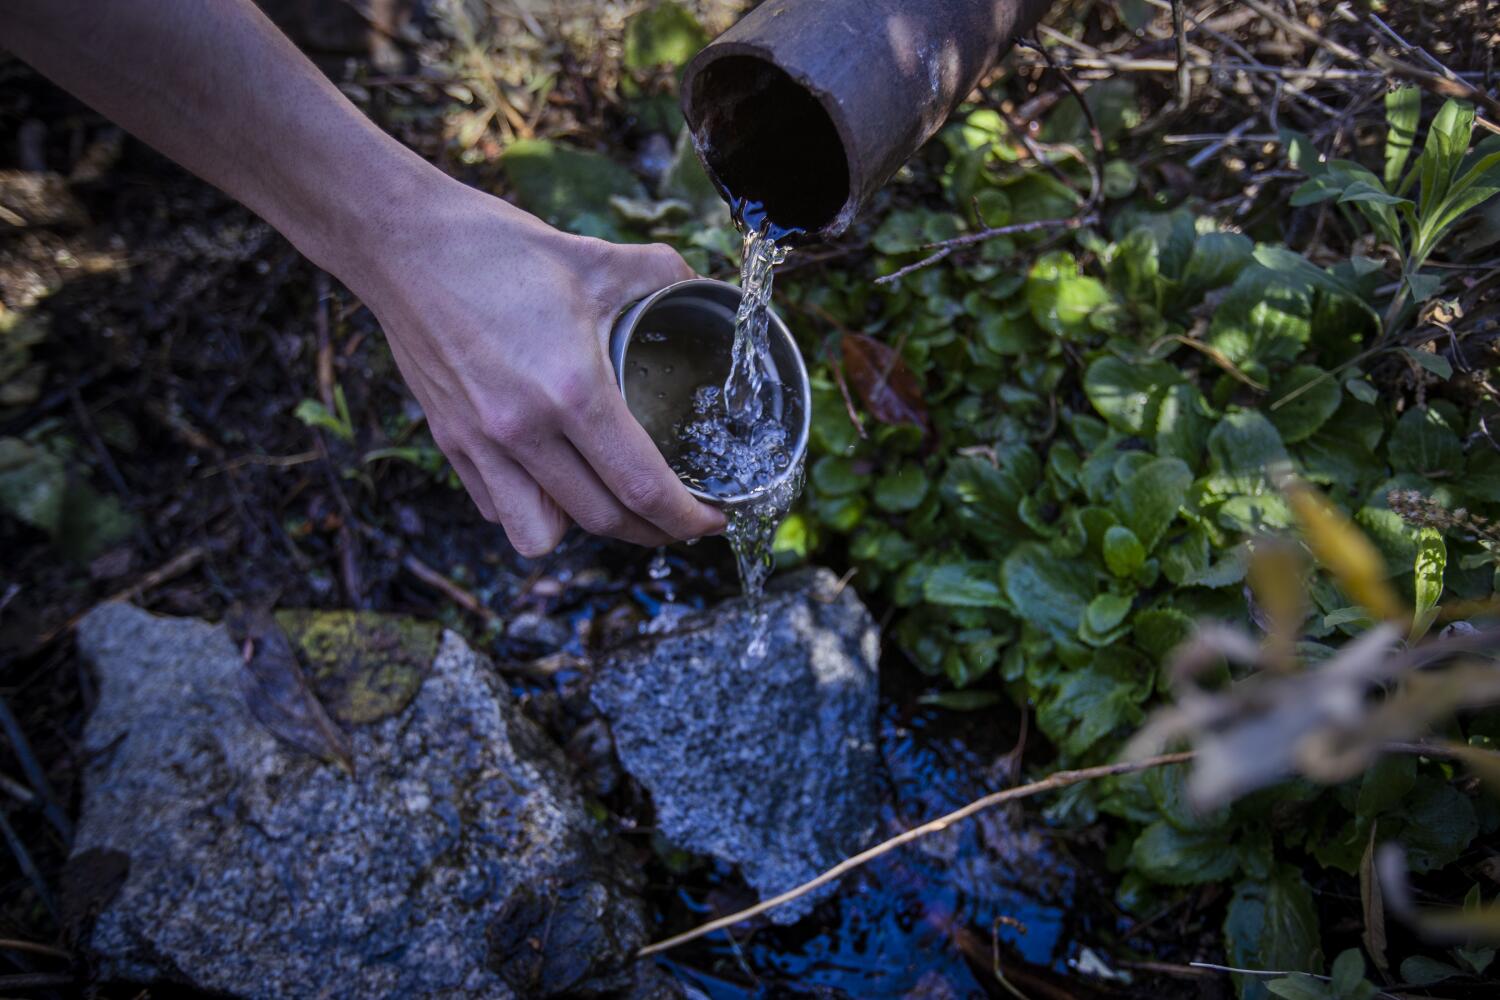 California environmental group sues U.S. Forest Service over Arrowhead bottled water operation 